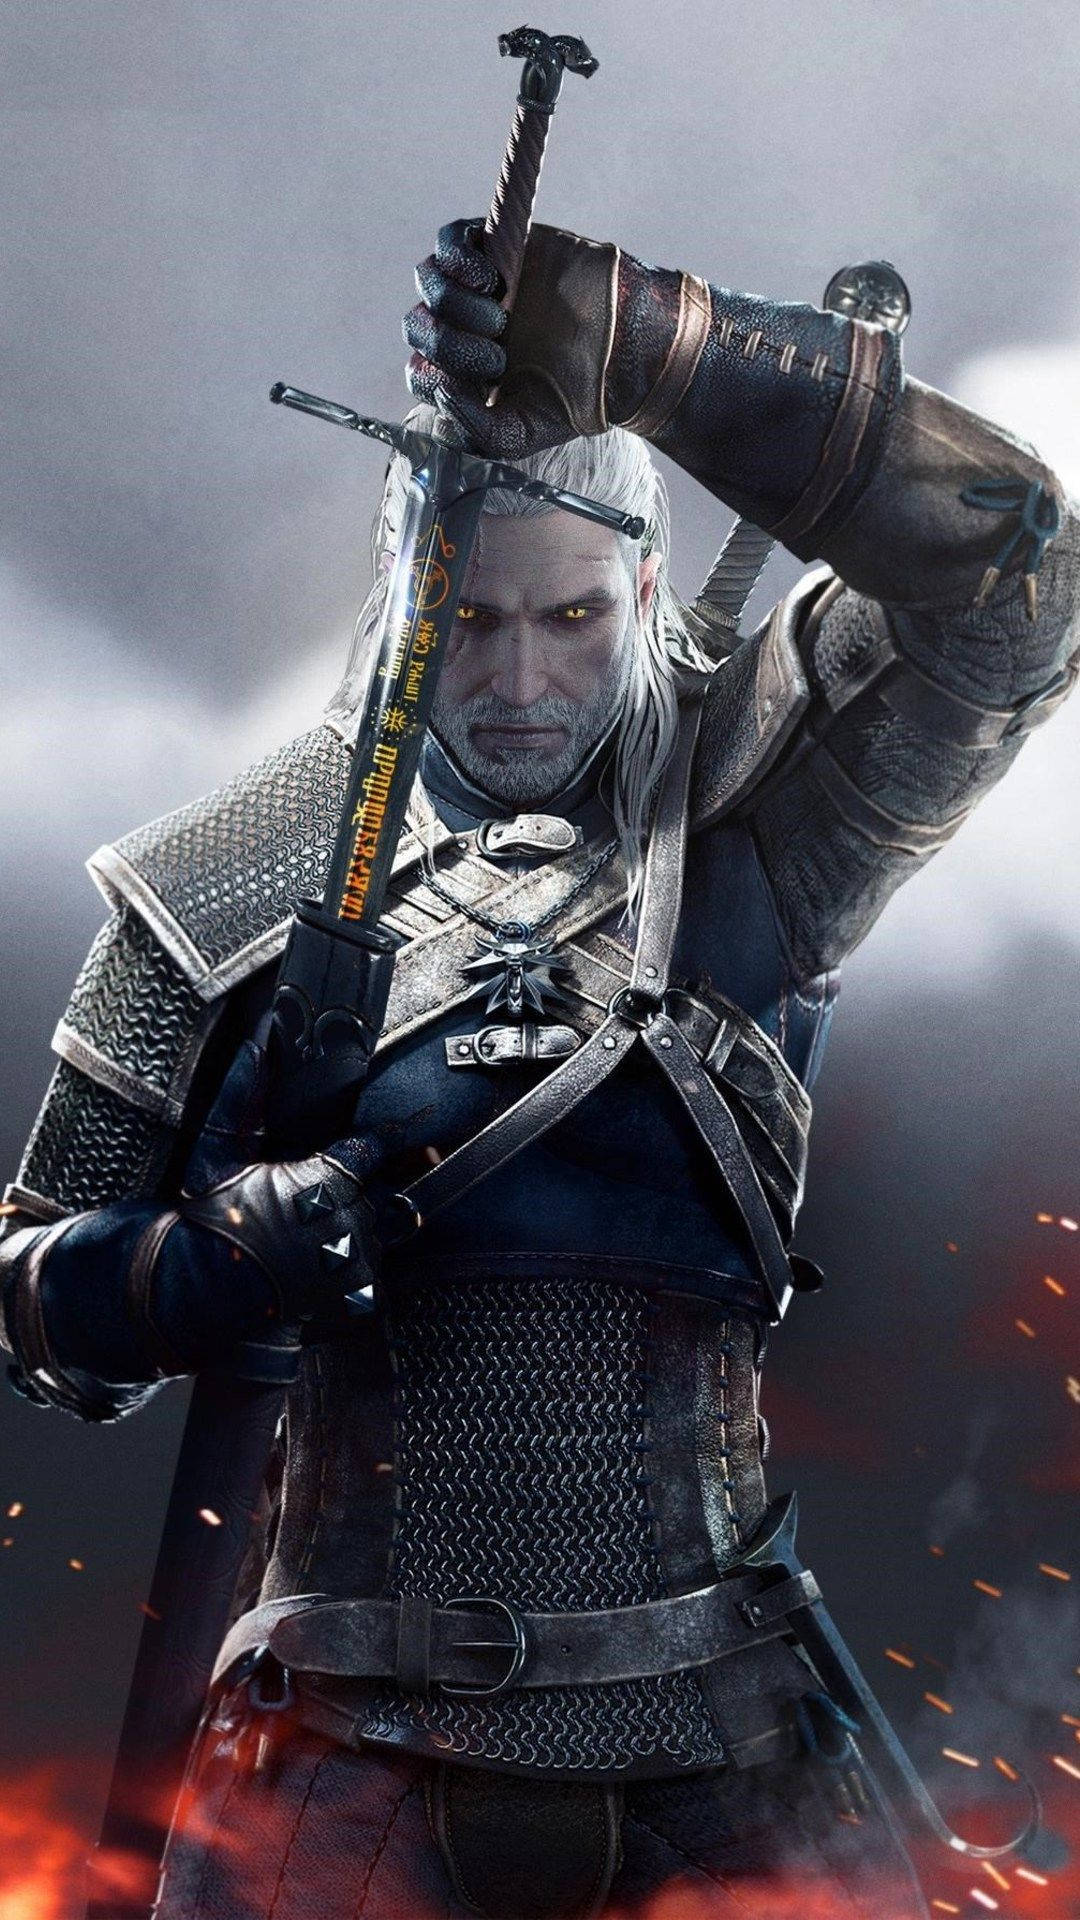 Geralt Unsheathing His Sword Witcher 3 Iphone Background